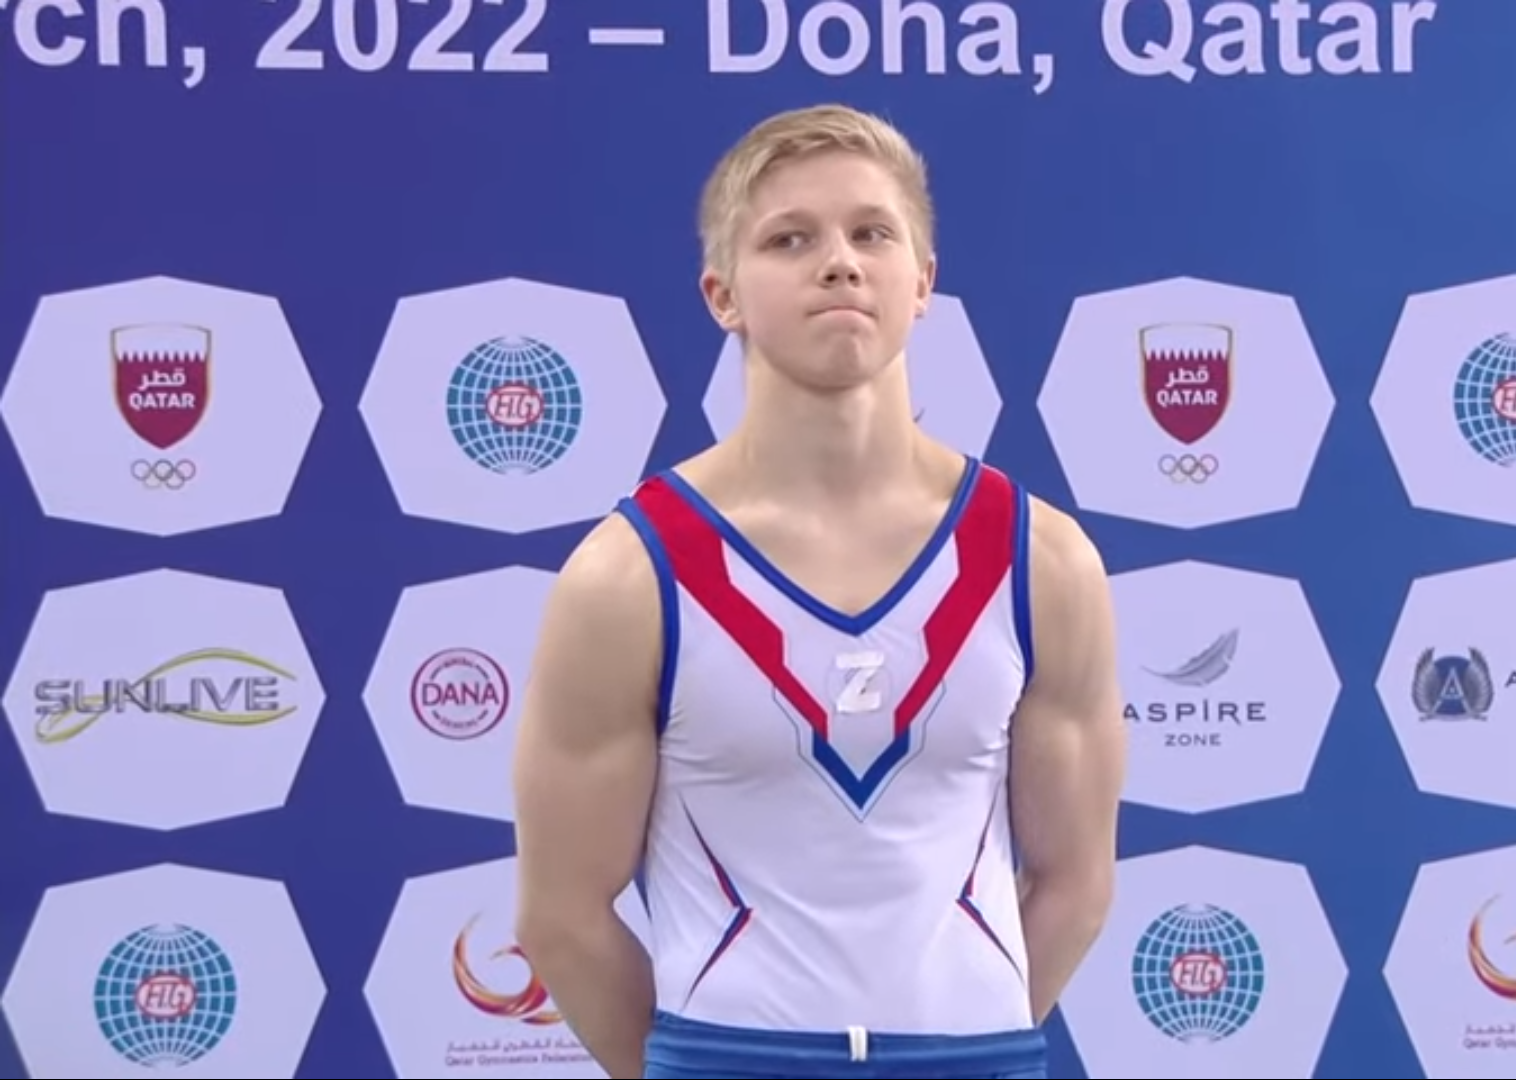 Banned gymnast Kuliak set to miss Cup of Russia over fear of FIG sanctions